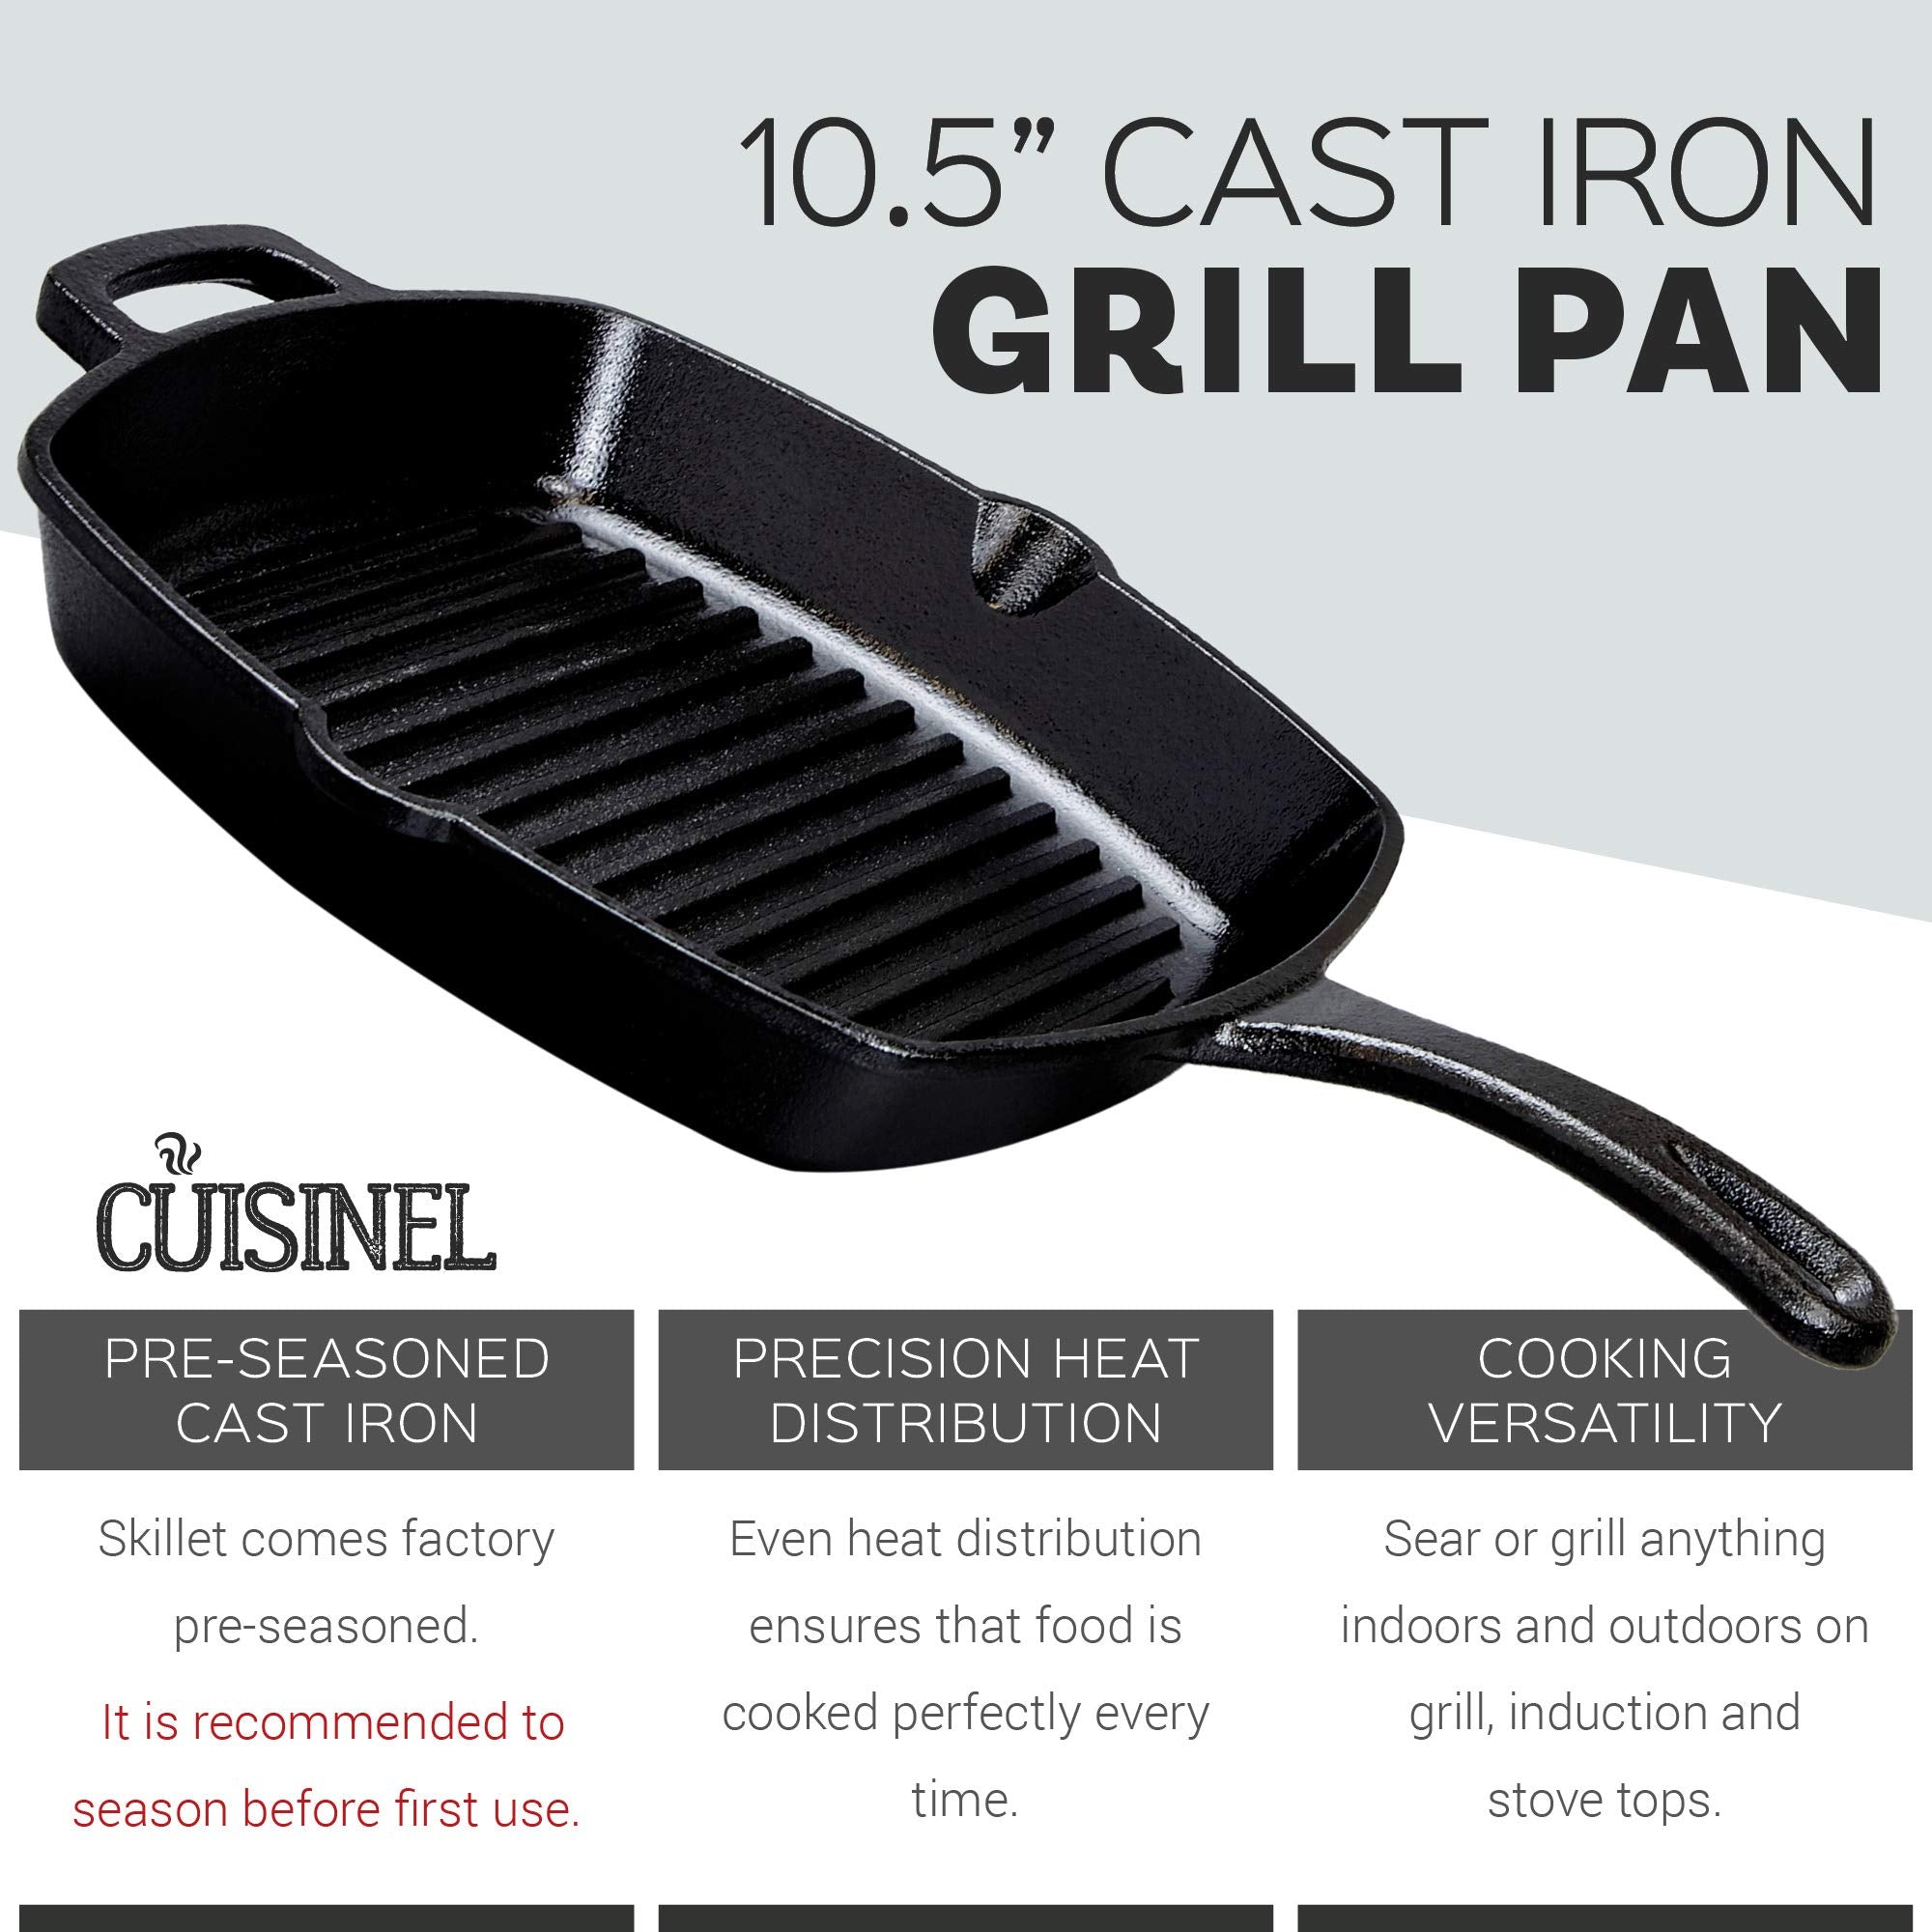 Cuisinel Cast Iron Square Grill Pan + Glass Lid - 10.5" Pre-Seasoned Ridged Skillet + Handle Cover + Pan Scraper - Grill, Stovetop, Fire Safe - Indoor and Outdoor Use - for Grilling, Frying, Sauteing  - Good